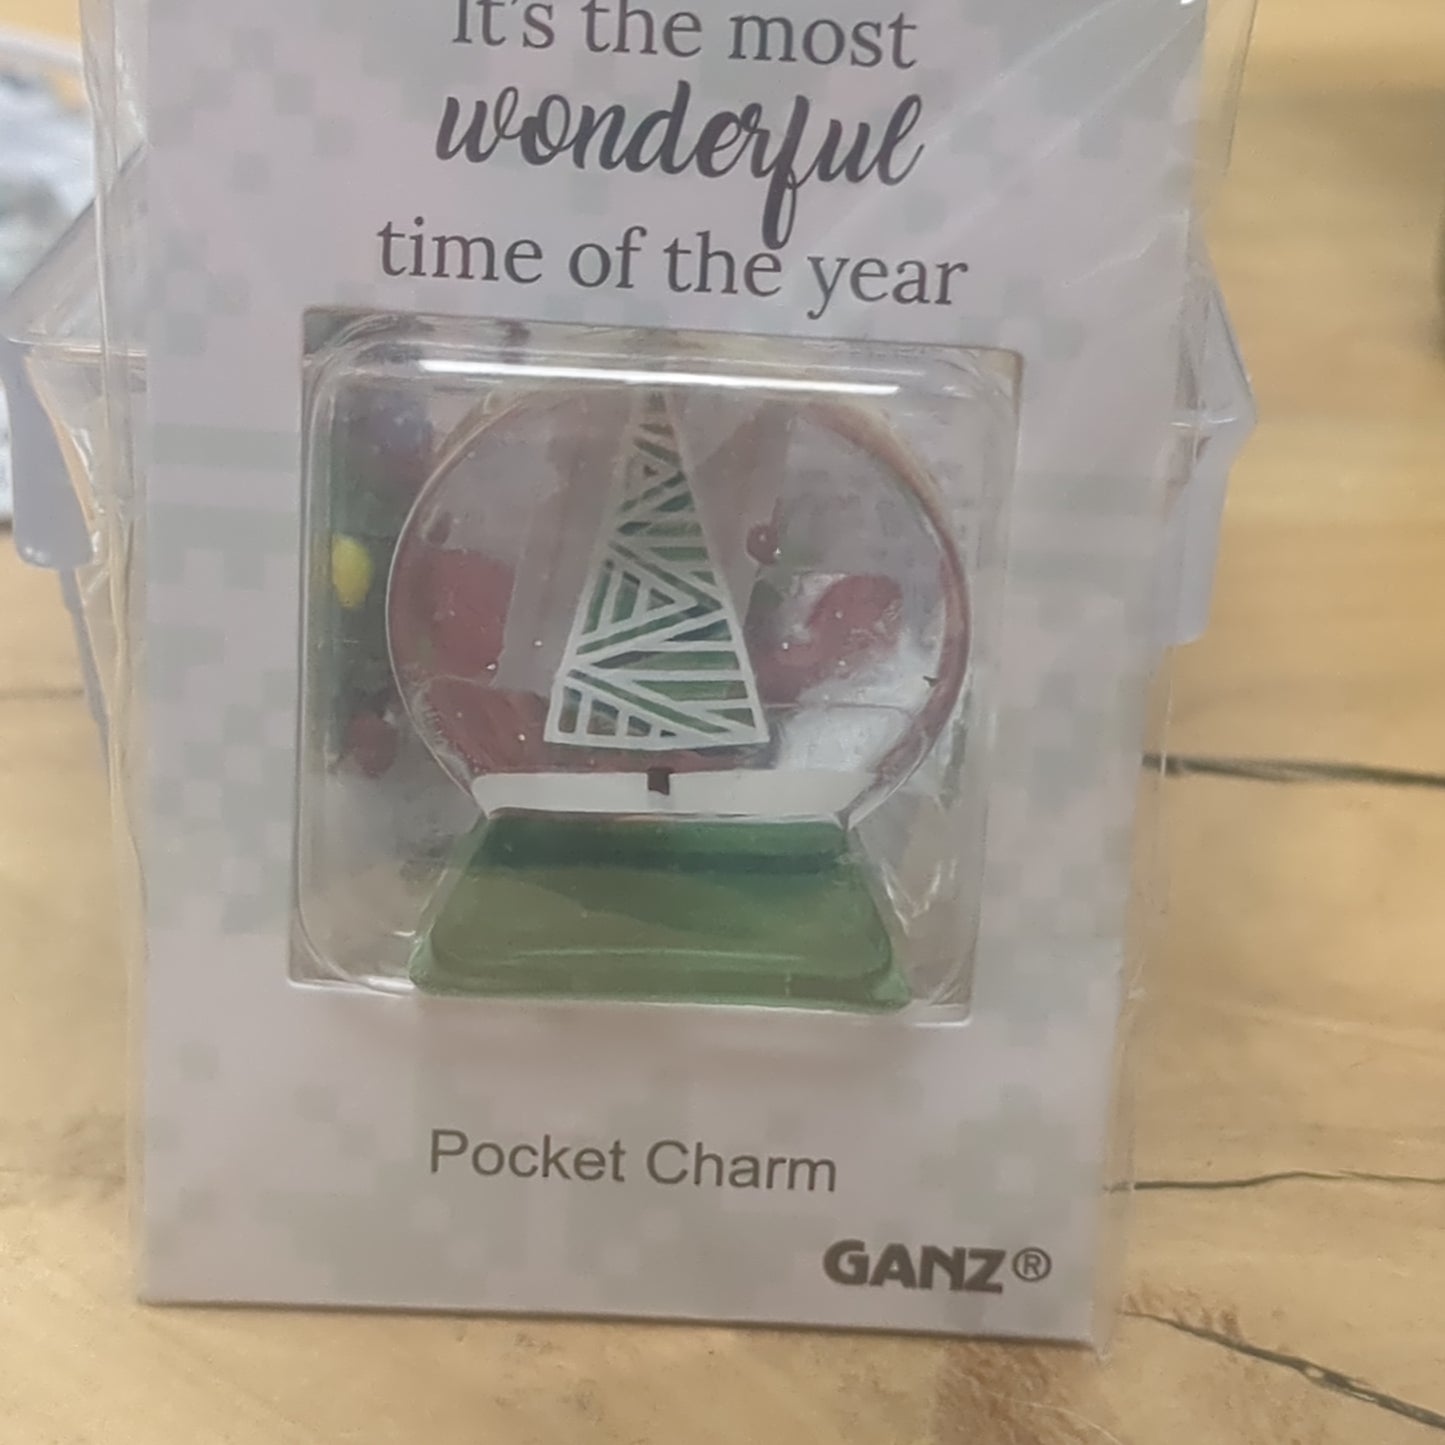 Pocket charm snow globe appearance with tree inside. It's the most wonderful time of the year